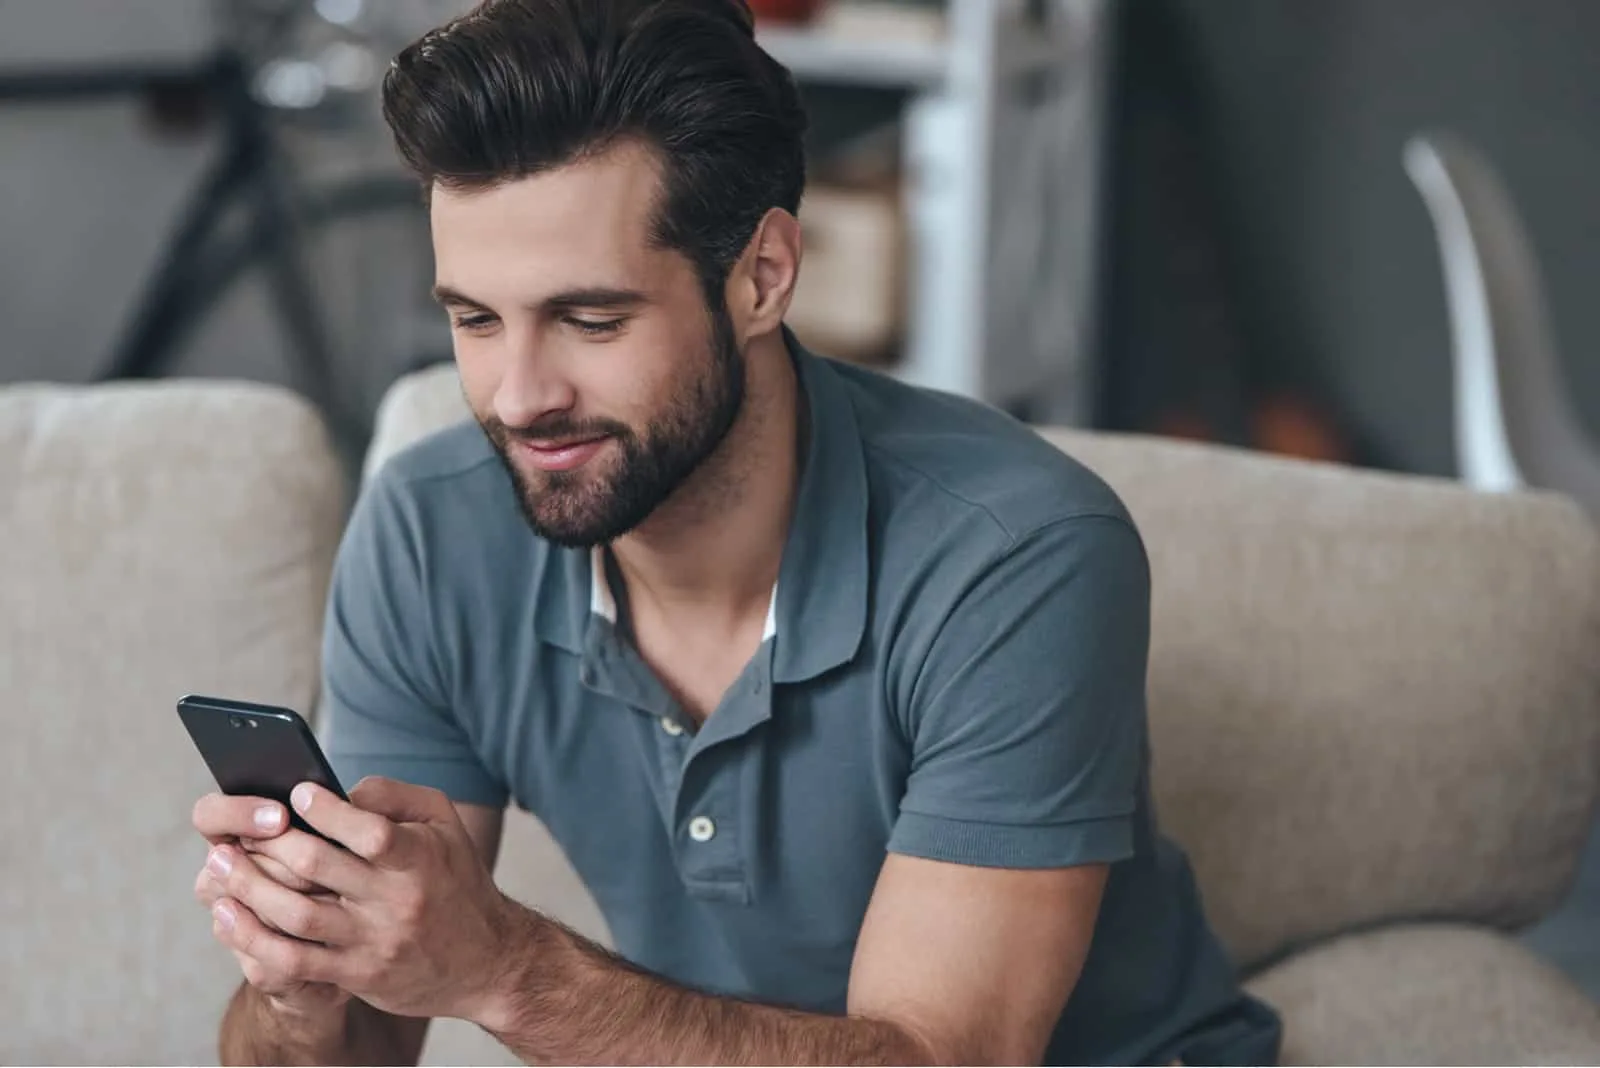 a smiling man sitting on a couch with a phone in his hand